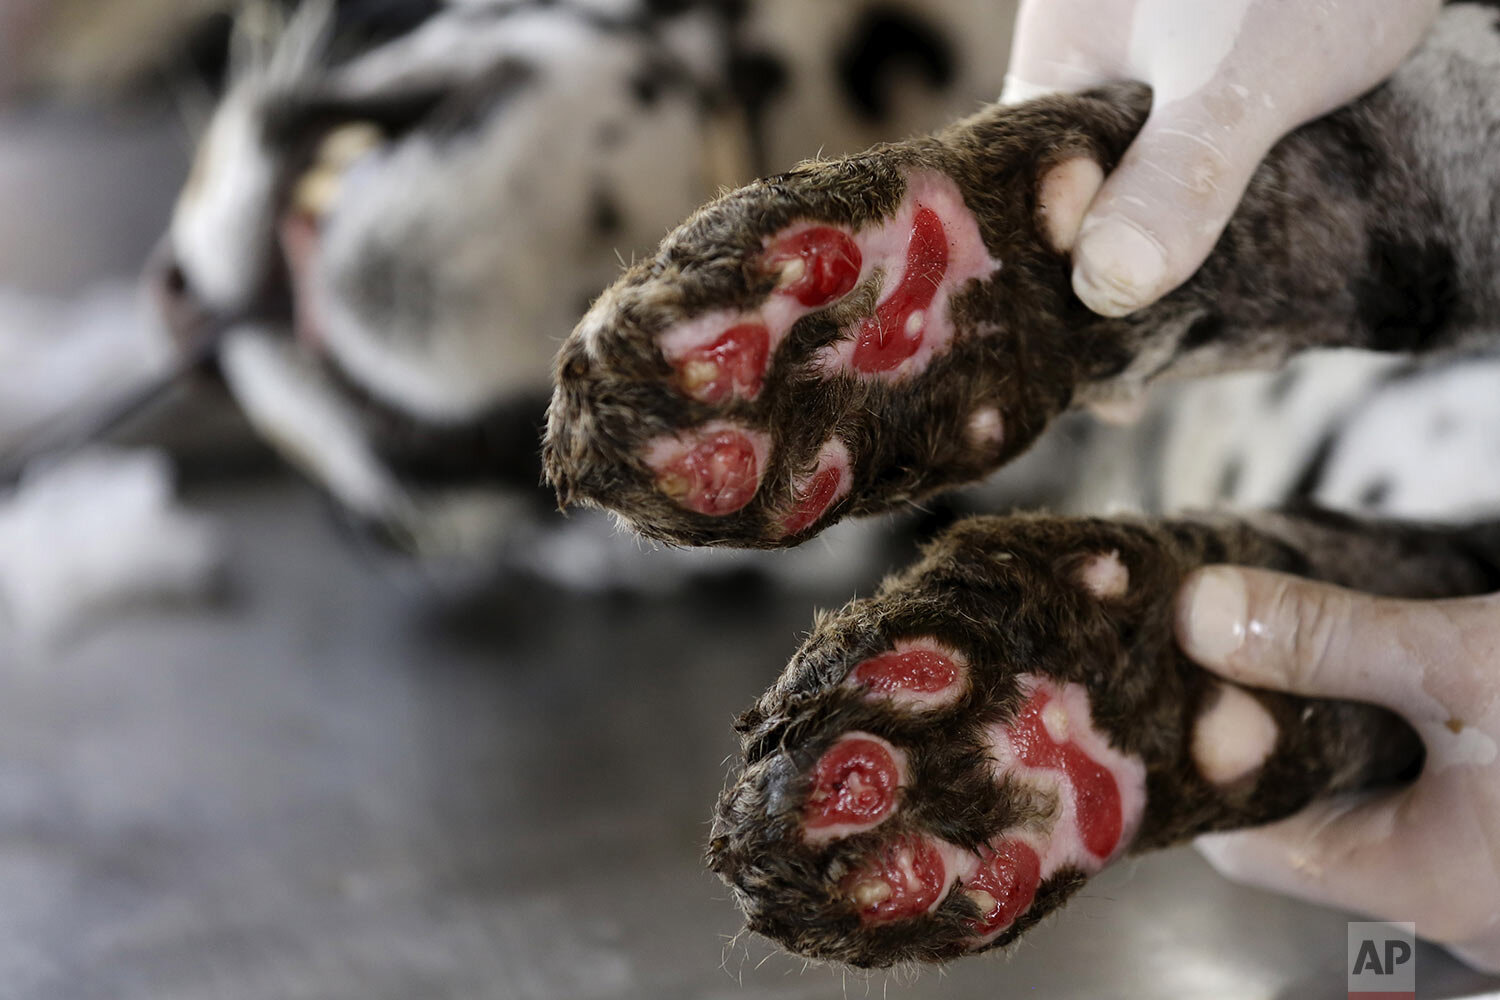  A vet shows the paws of  Jaguar “Amanaci,” who suffers third degree burns due to the fires in the Pantanal, at Nex Felinos NGO that defends endangered wild cats in Corumba, Brazil, Sept. 27, 2020. Two Jaguars were rescued from the Pantanal fire and 